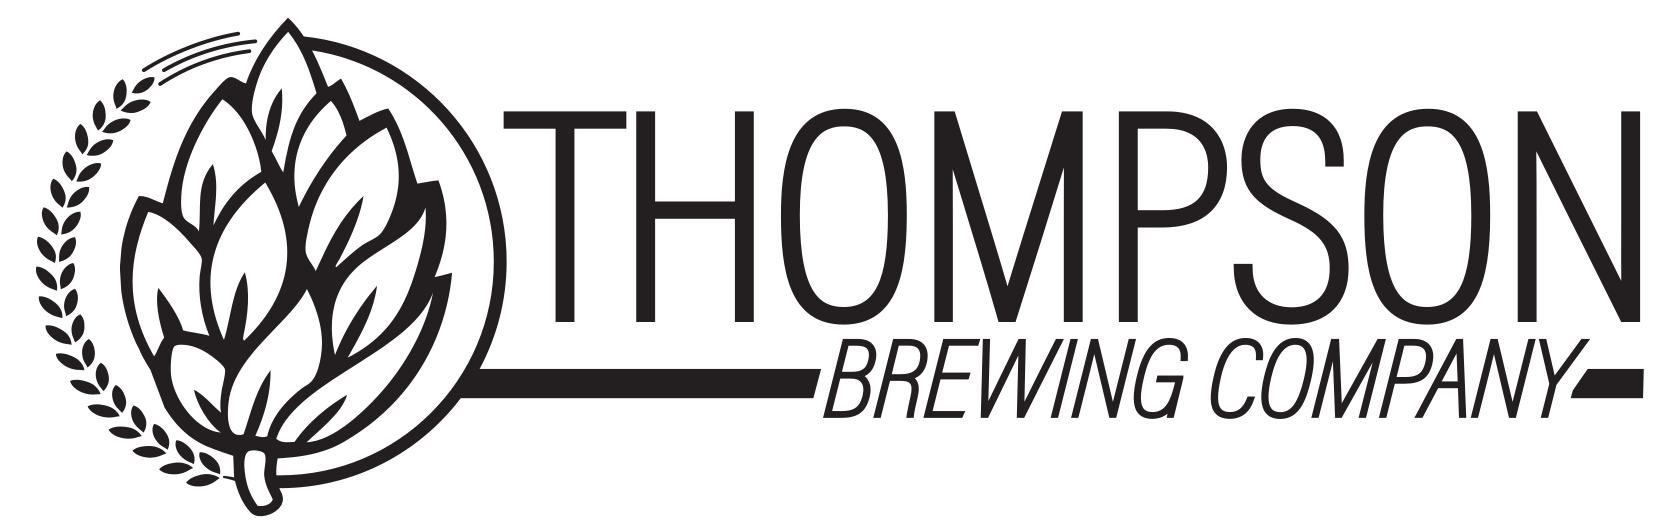 Thompson Brewing Co